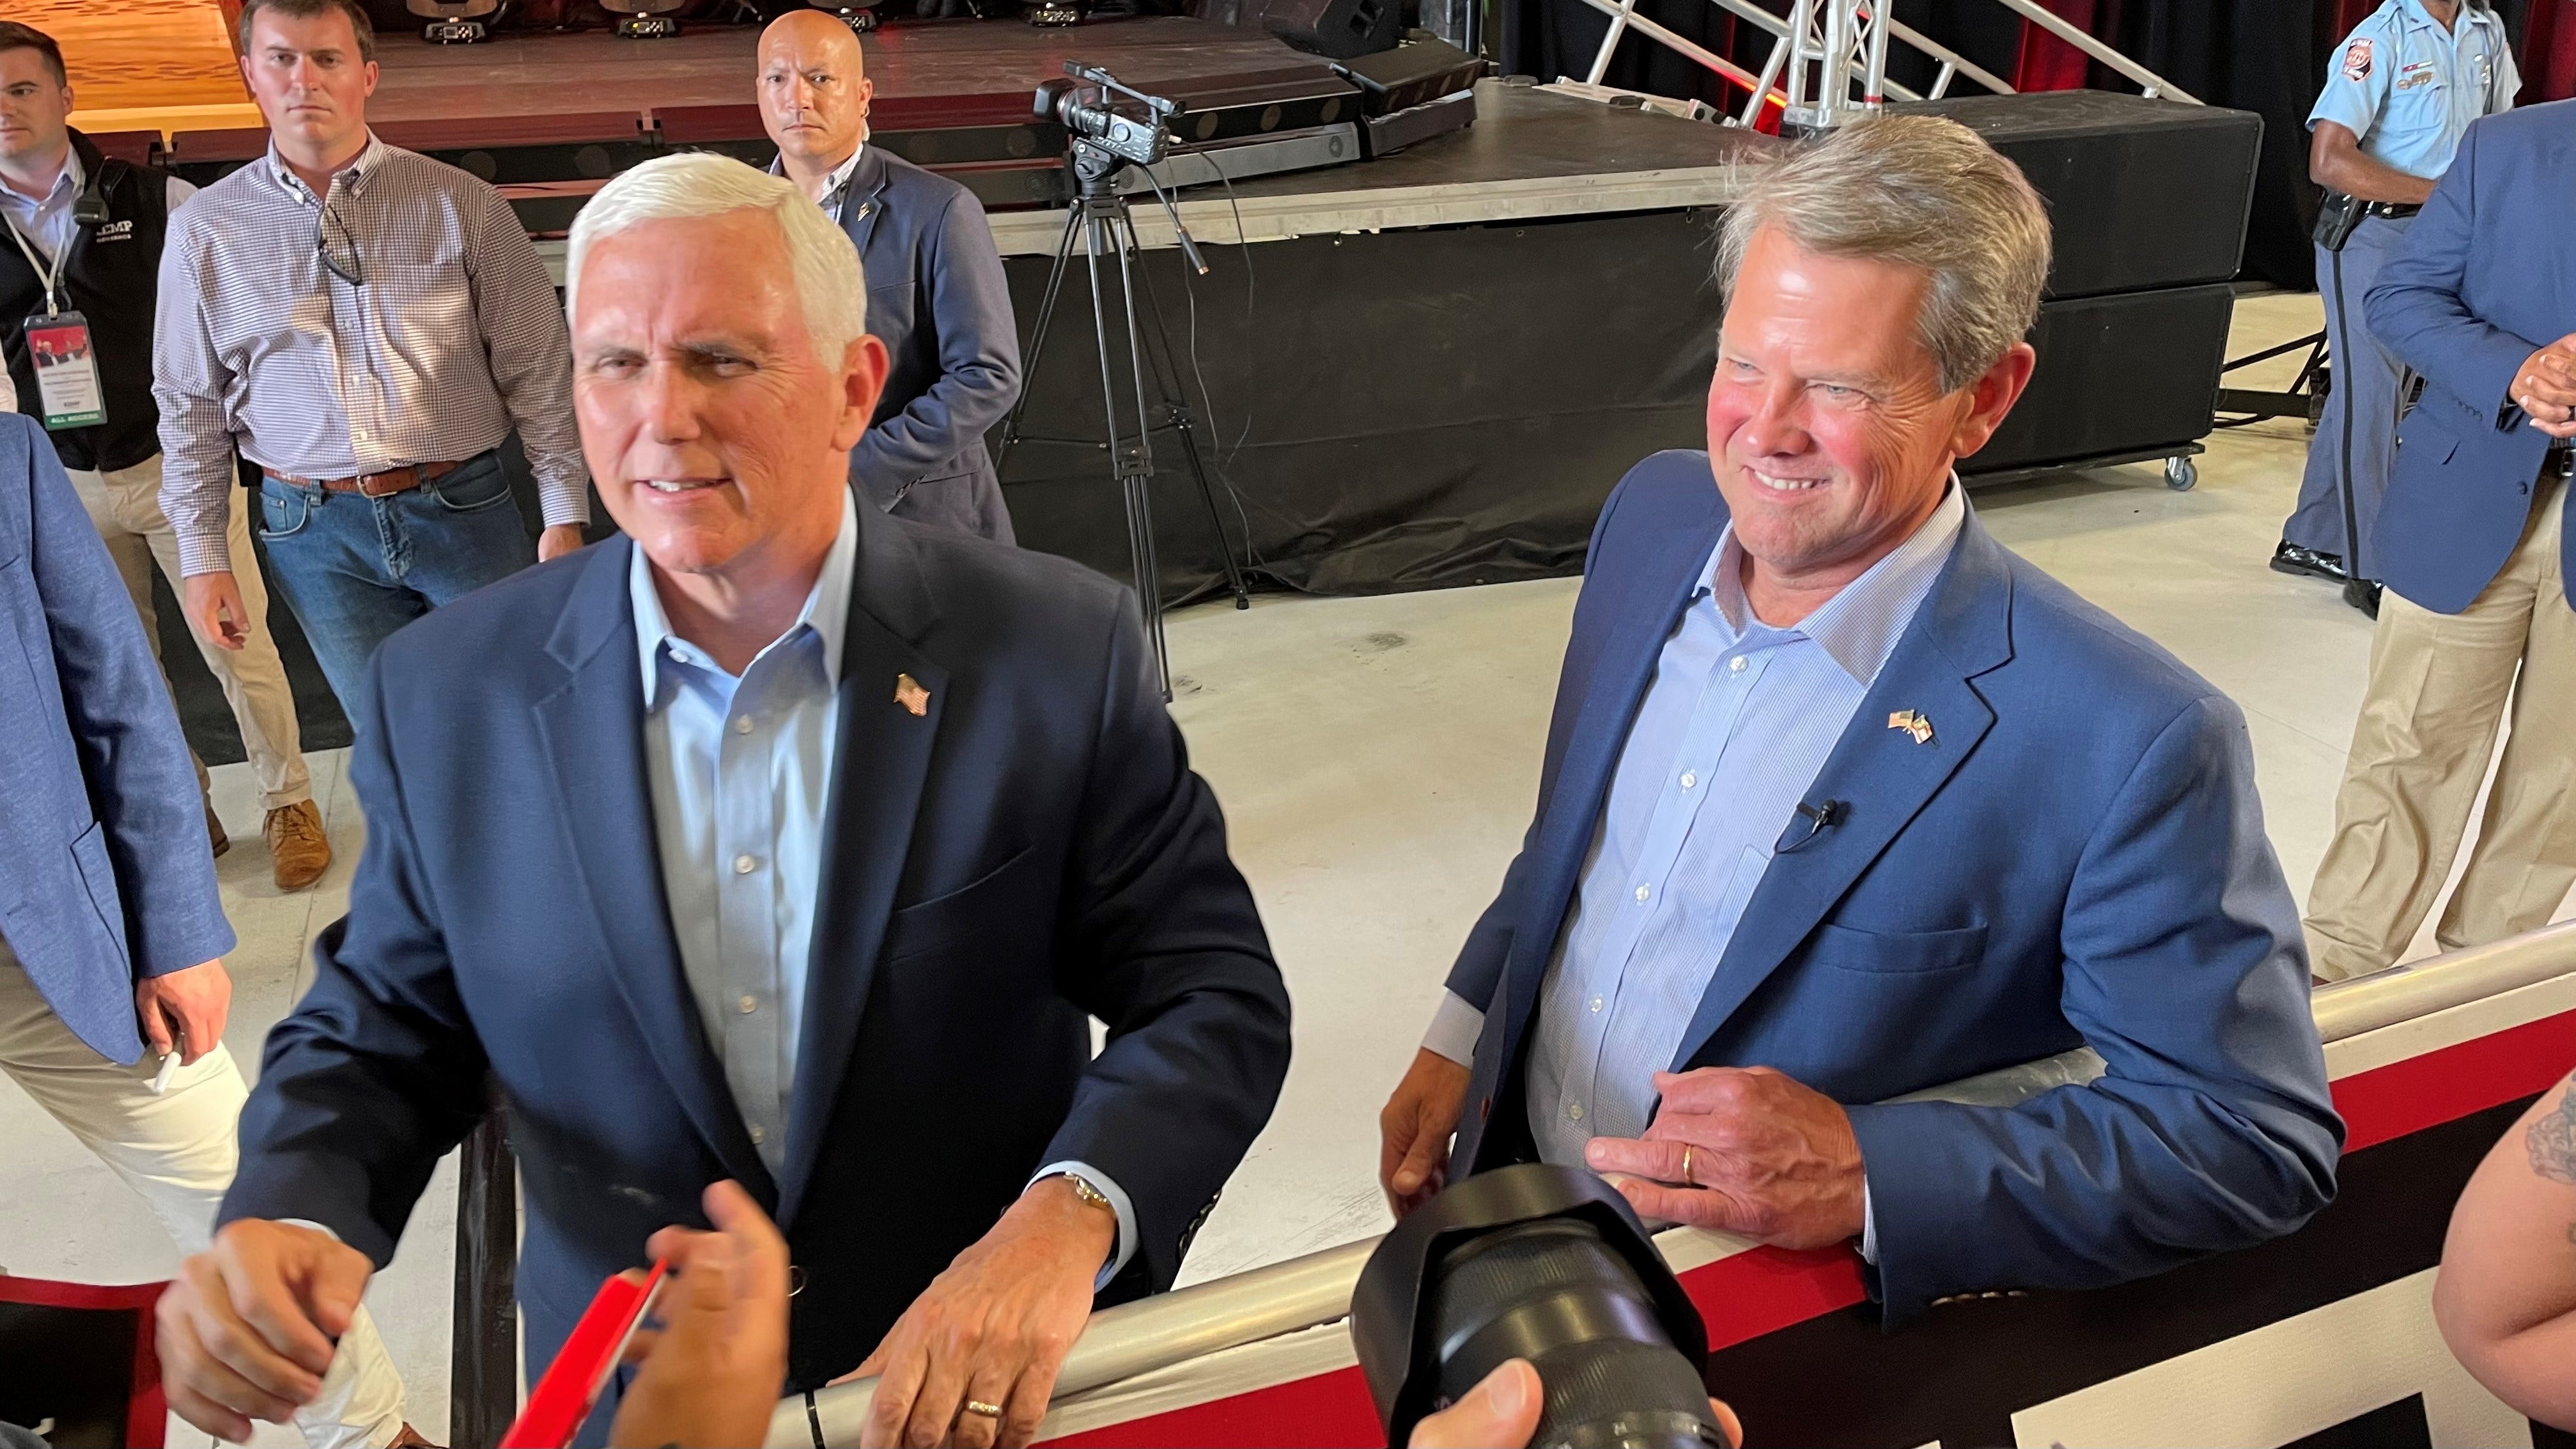 Trump and Pence hold dueling rallies for Perdue and Kemp on eve of Georgia’s bitter GOP gubernatorial primary